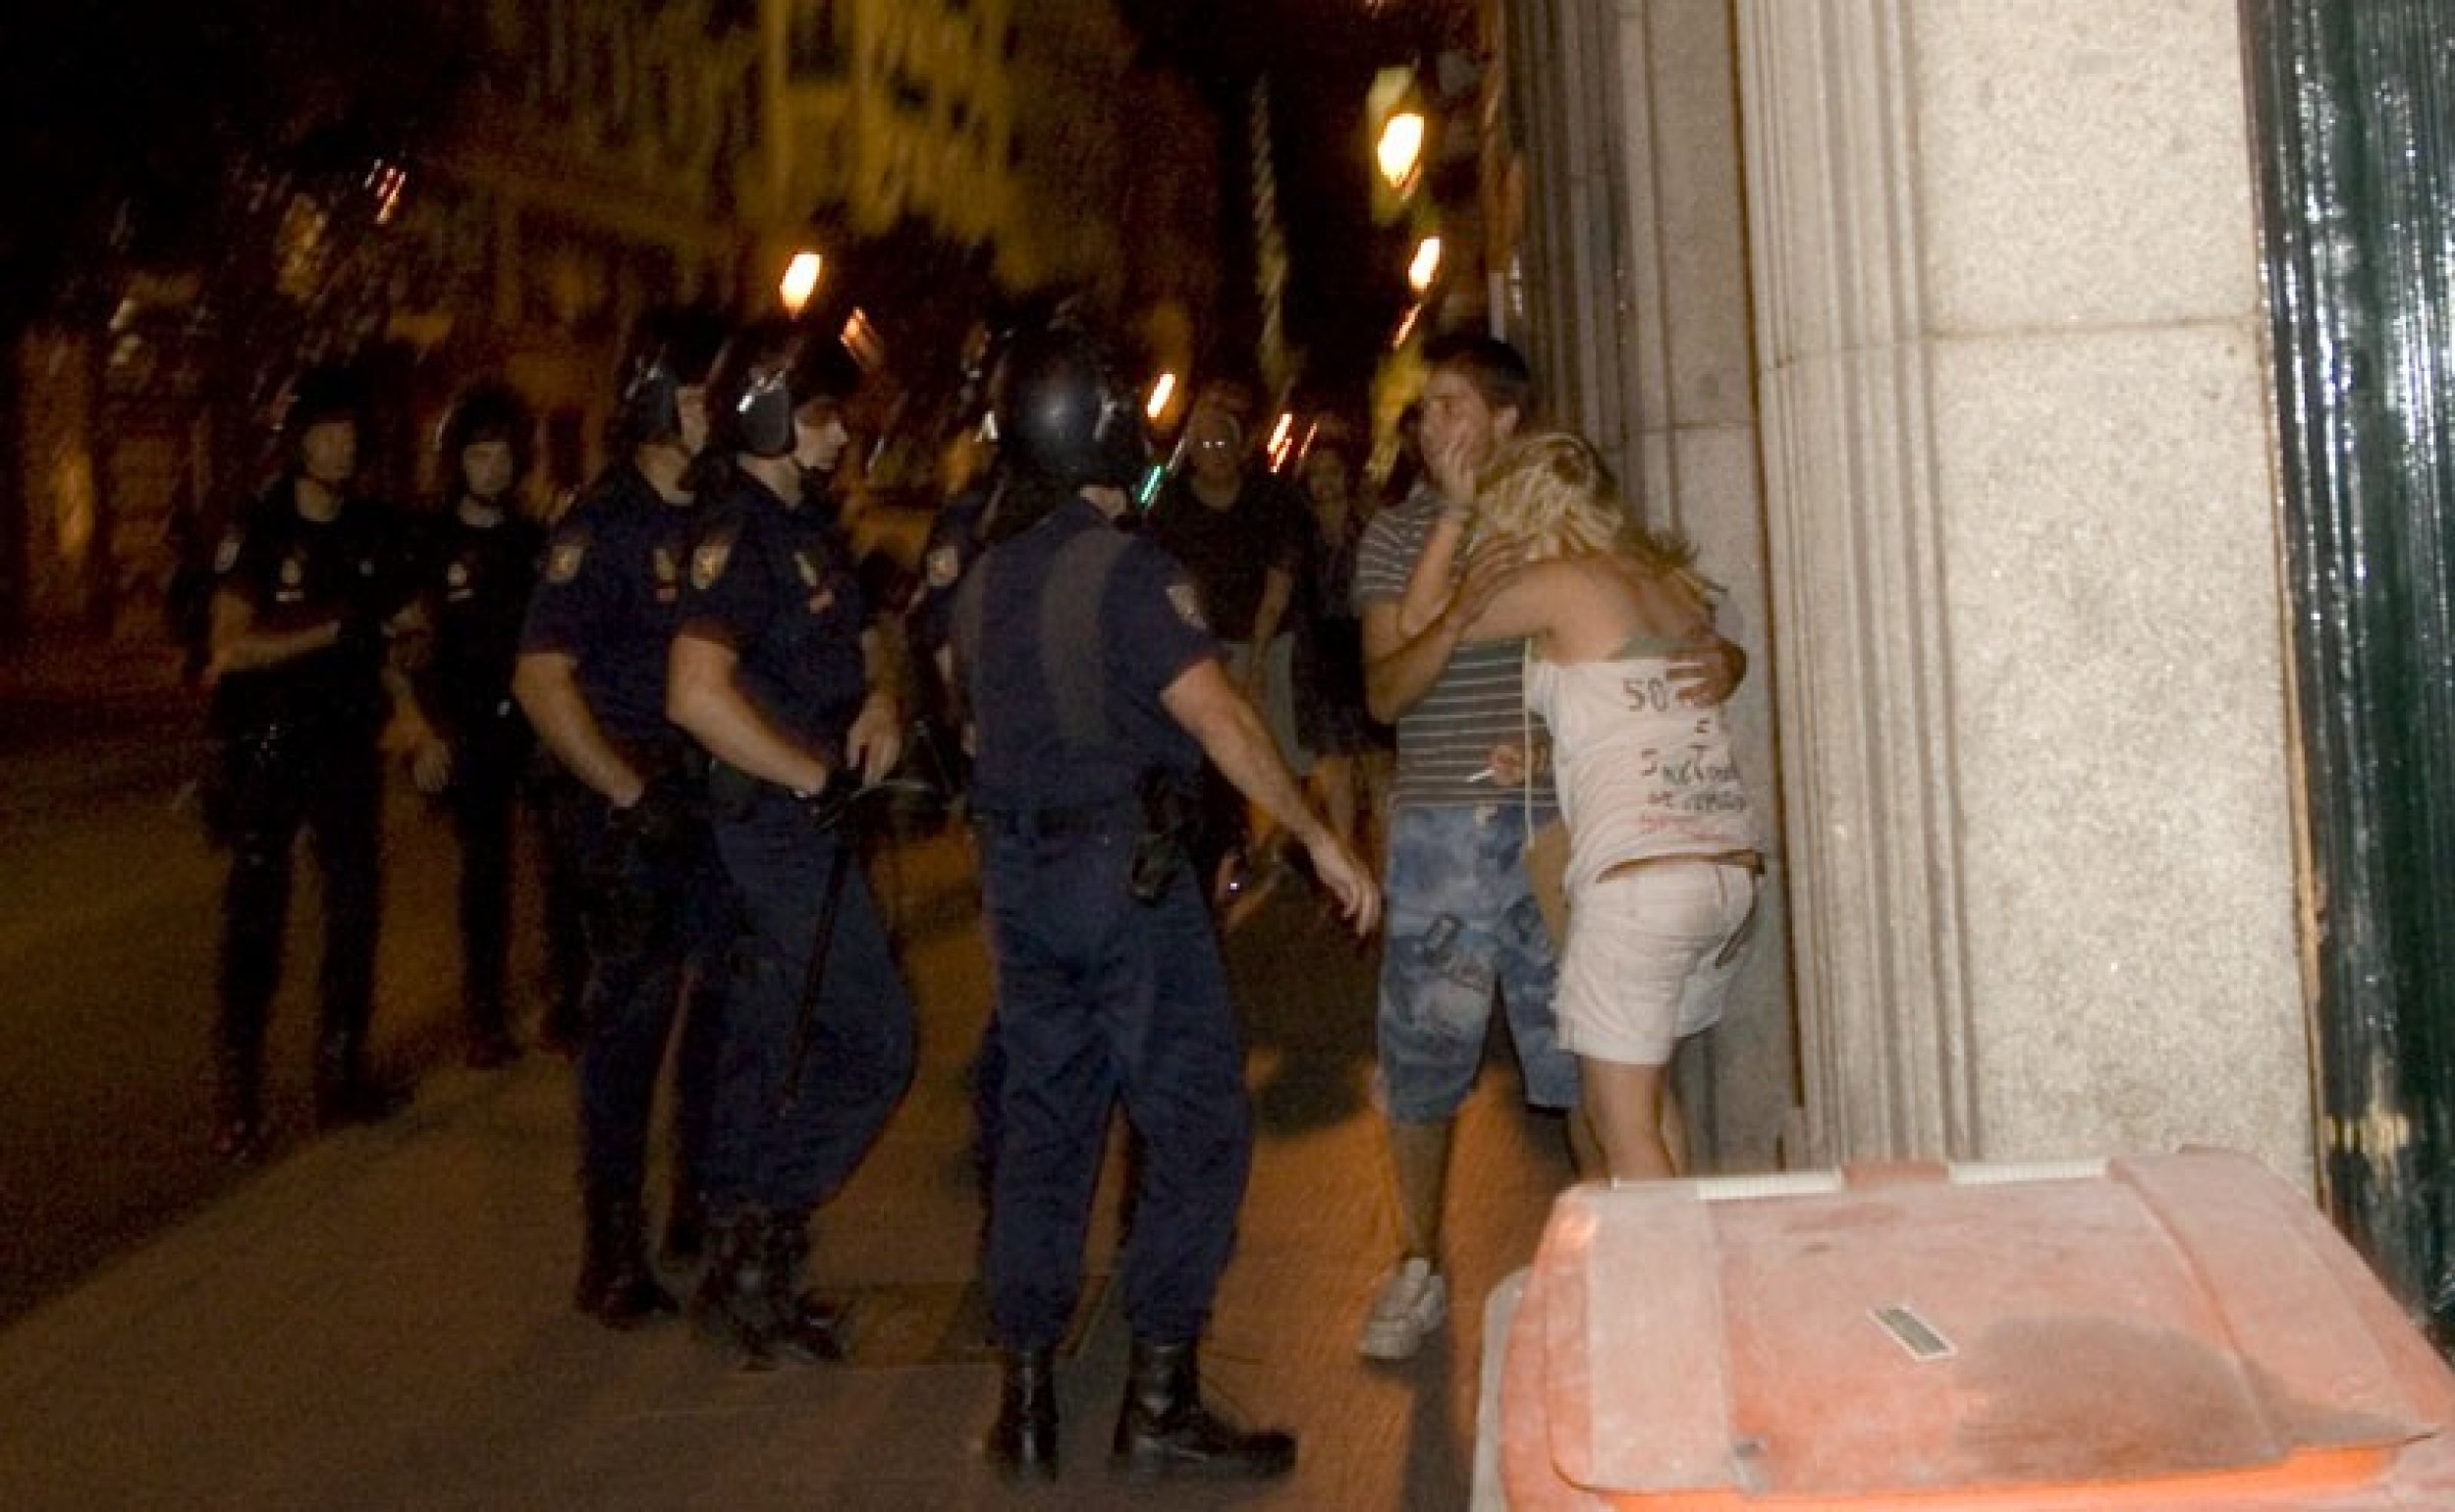 Spanish riot police assault young woman